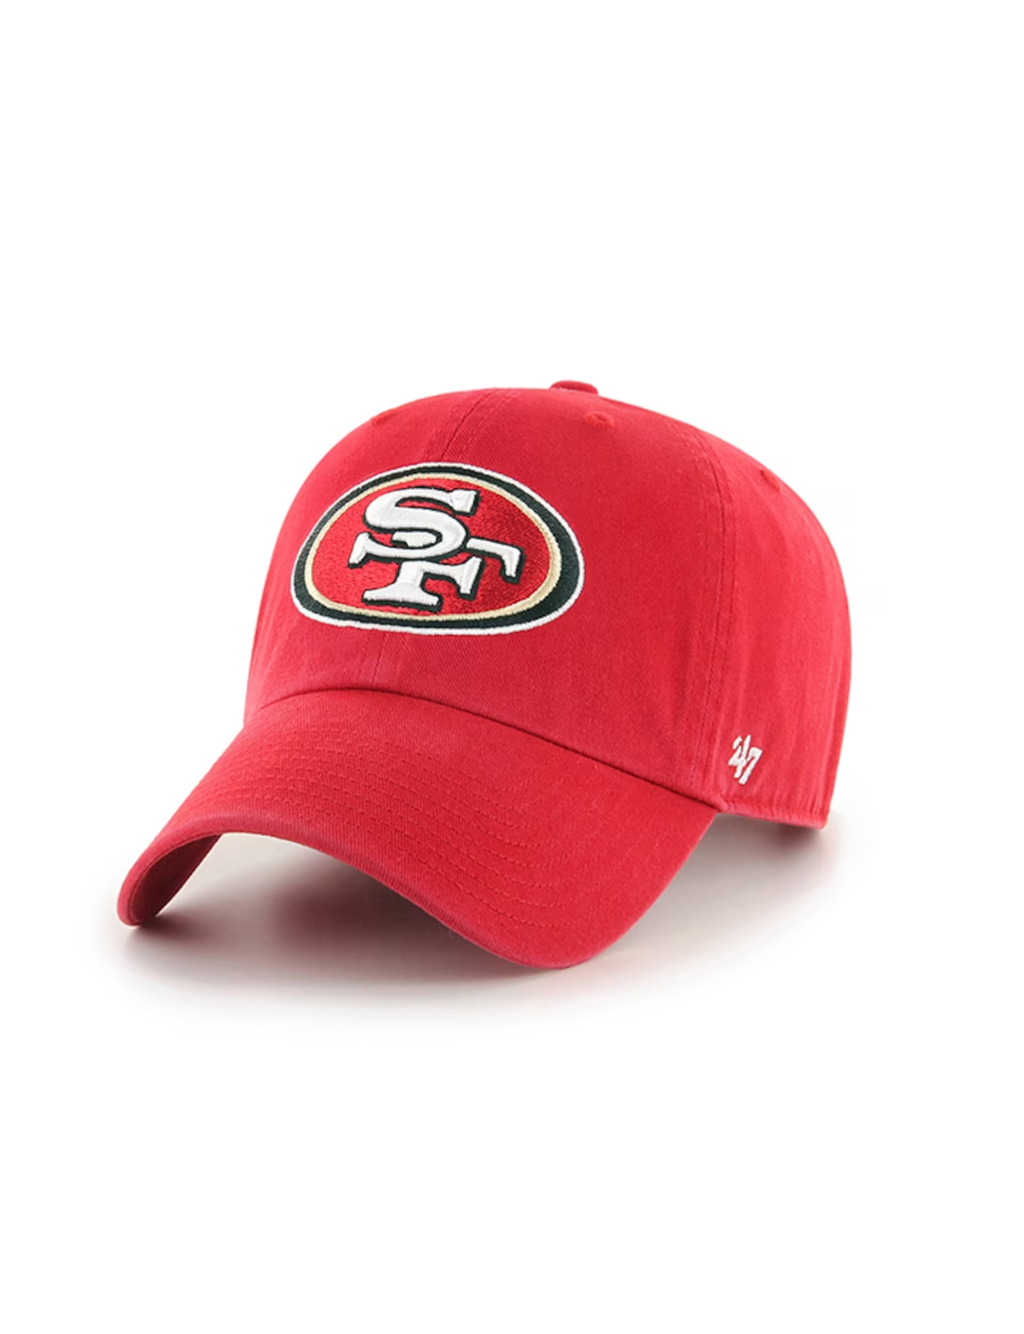 SF 49ers Basic Cap, Red/Red